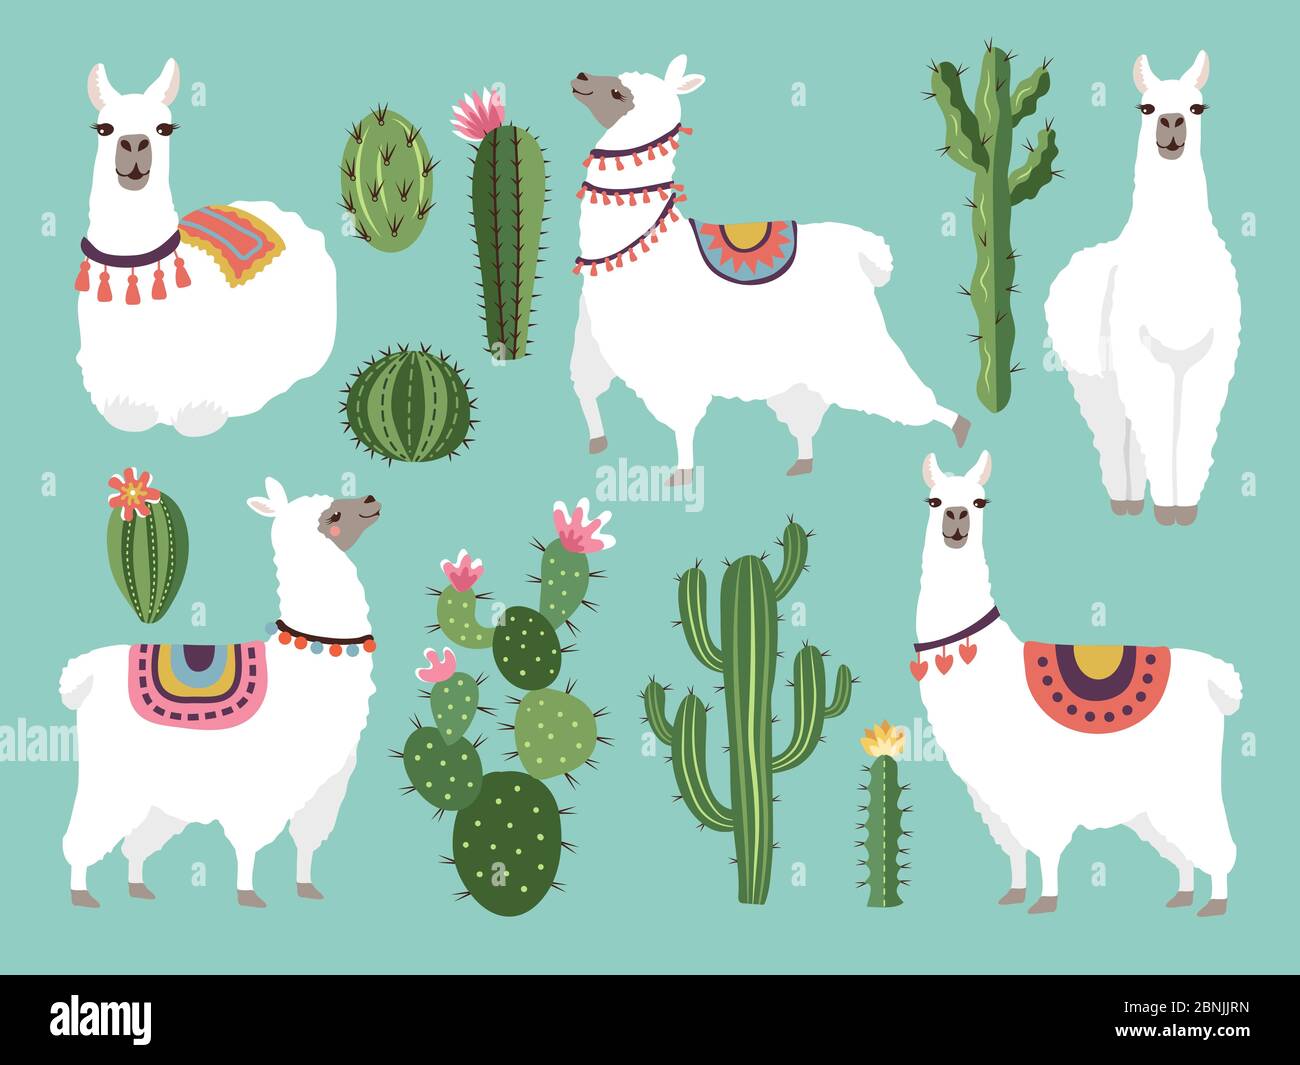 Illustrations of funny llama. Vector animal in flat style Stock Vector